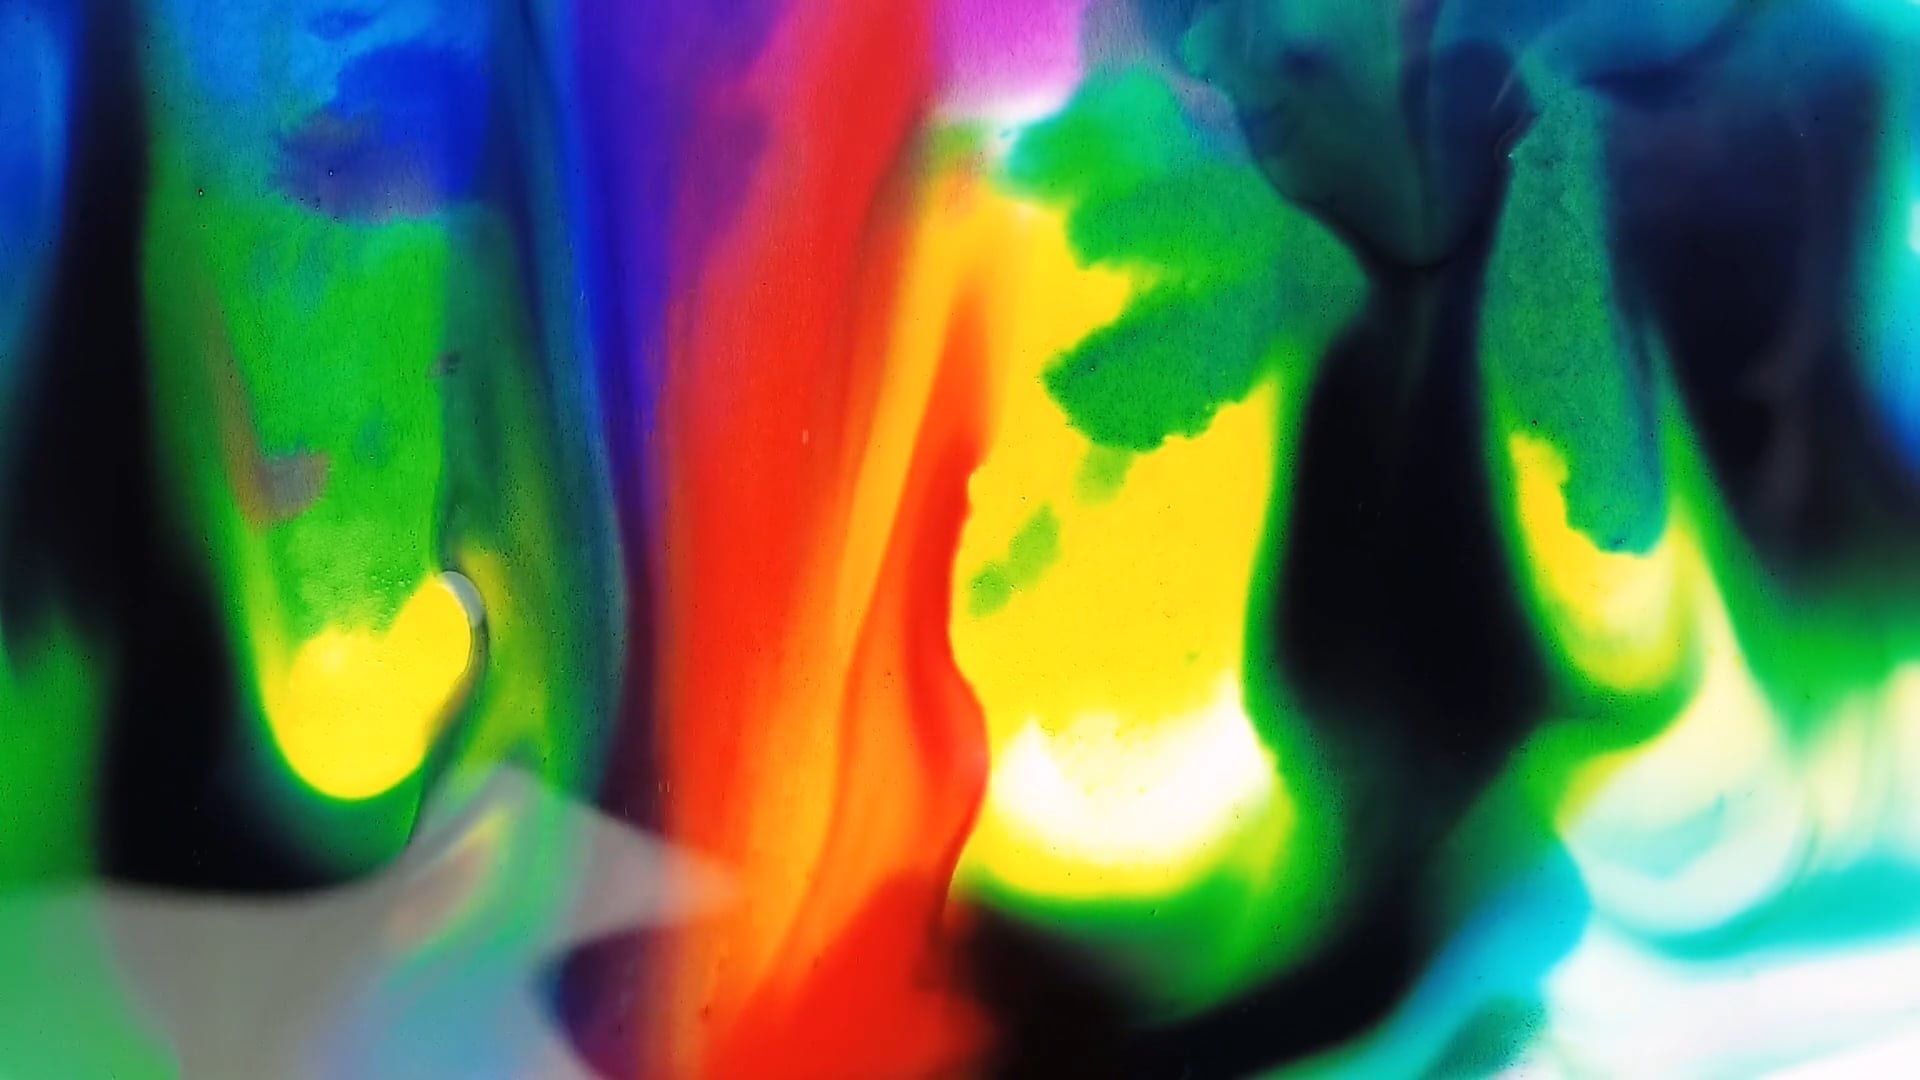 Water Color Mixing in A Close Up Footage · Free Stock Video